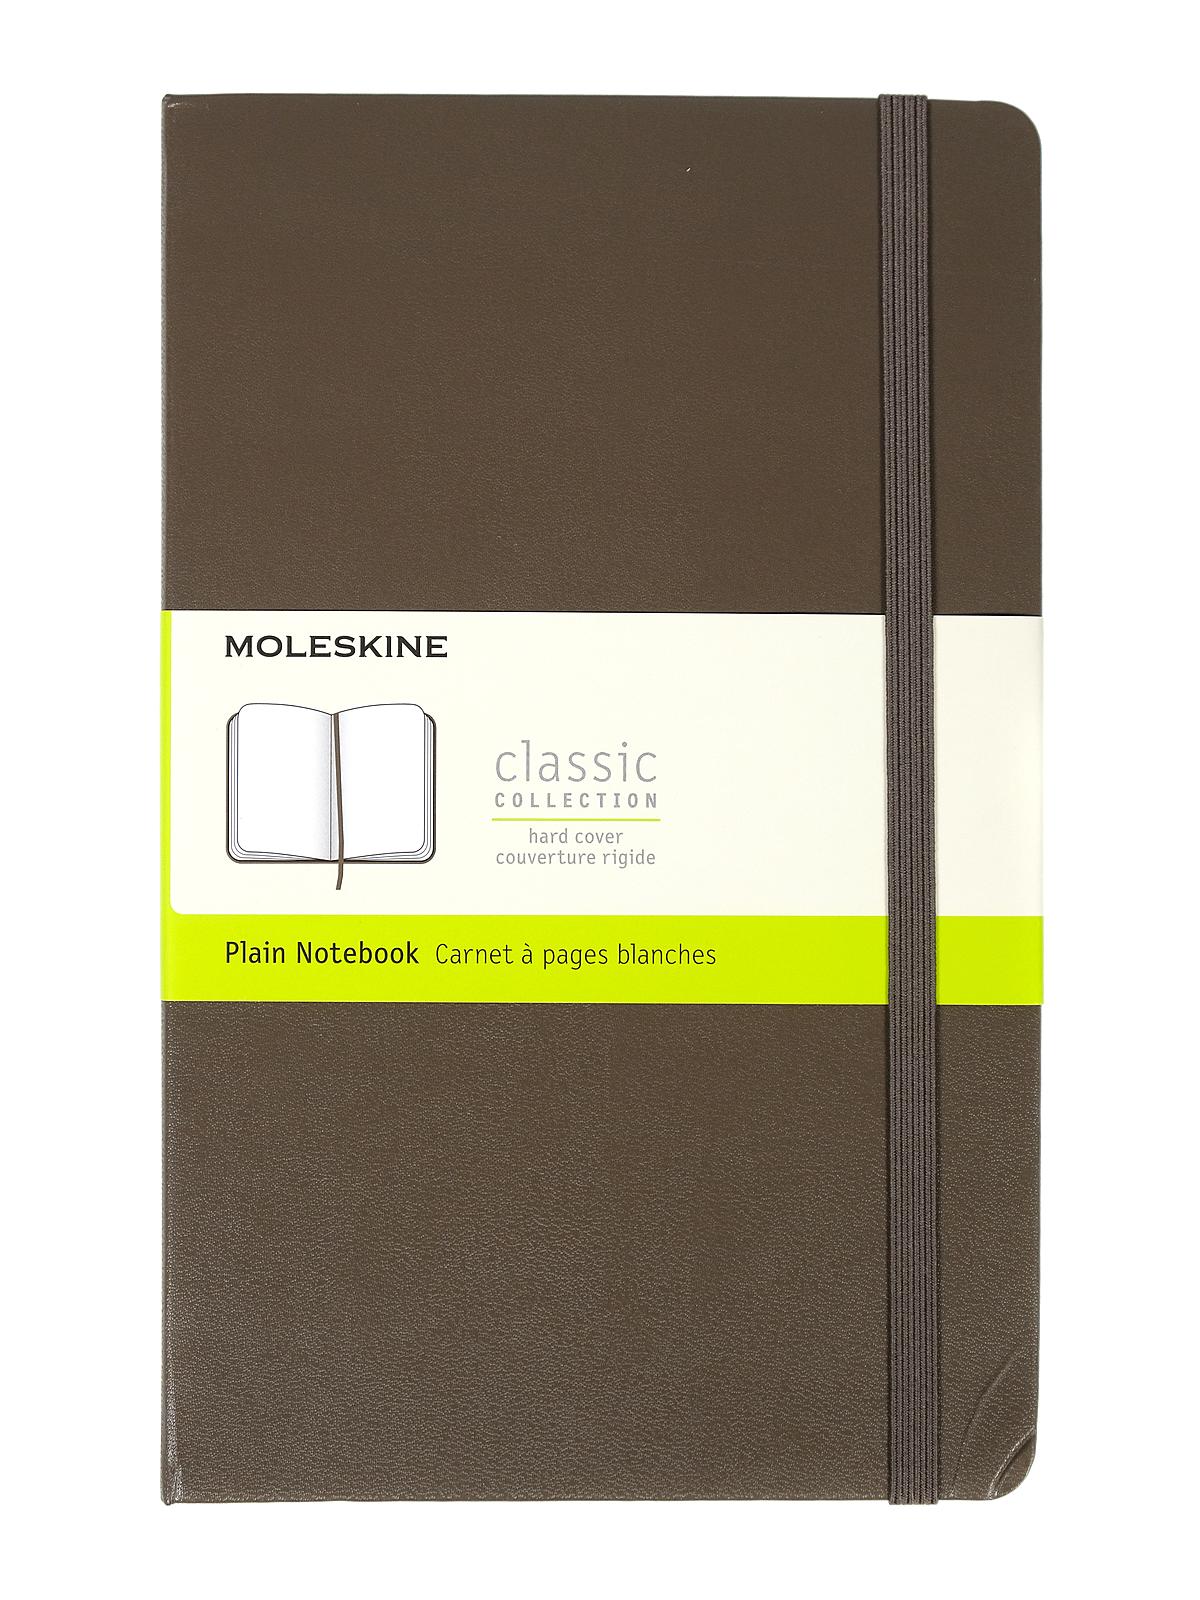 Classic Hard Cover Notebooks Earth Brown 5 In. X 8 1 4 In. 240 Pages, Unlined